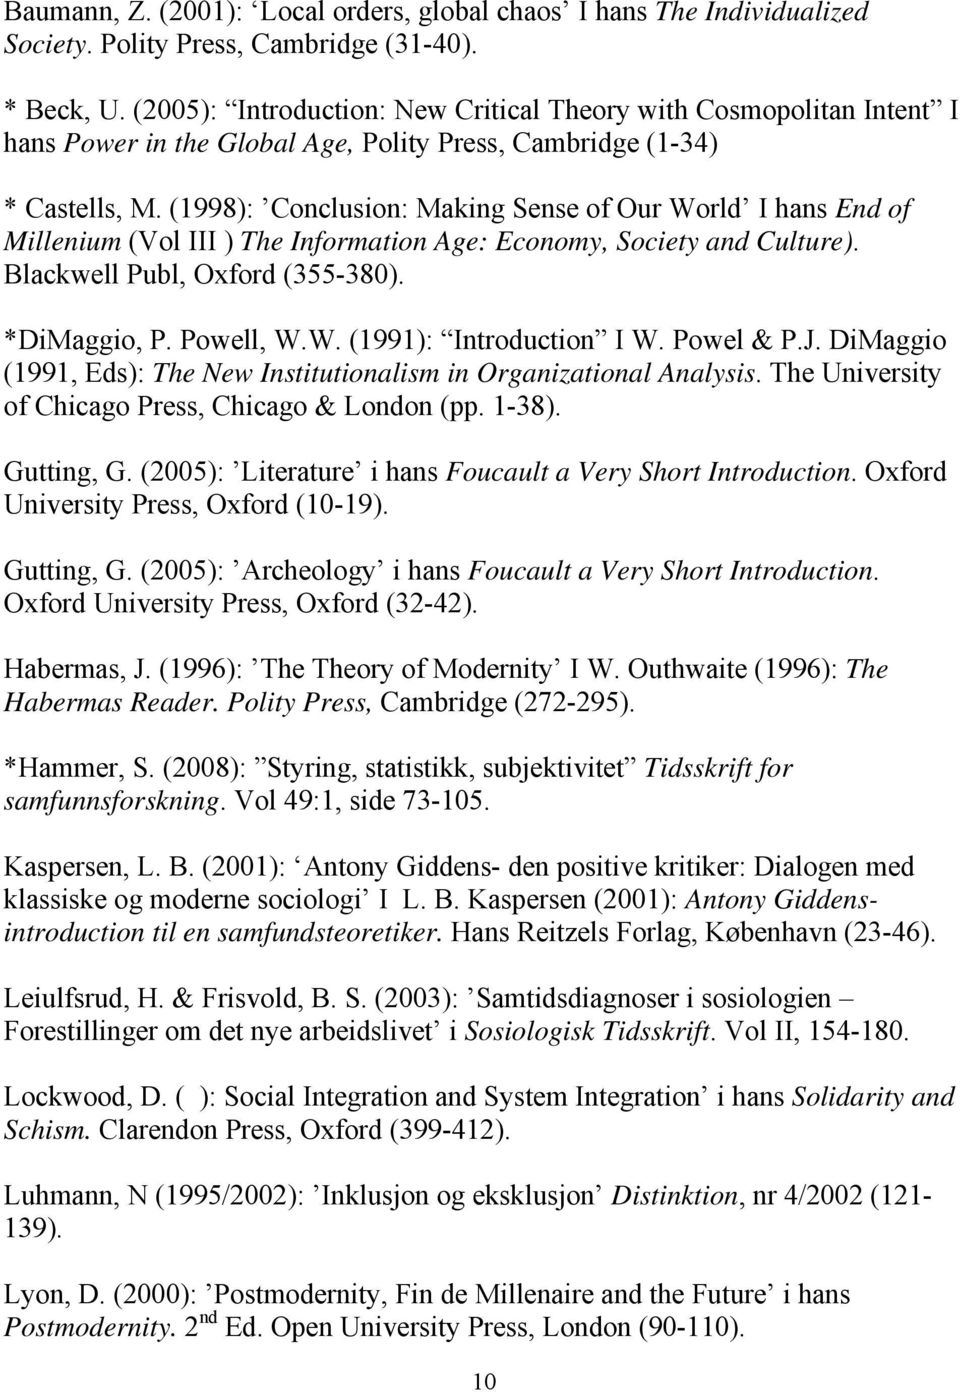 (1998): Conclusion: Making Sense of Our World I hans End of Millenium (Vol III ) The Information Age: Economy, Society and Culture). Blackwell Publ, Oxford (355-380). *DiMaggio, P. Powell, W.W. (1991): Introduction I W.